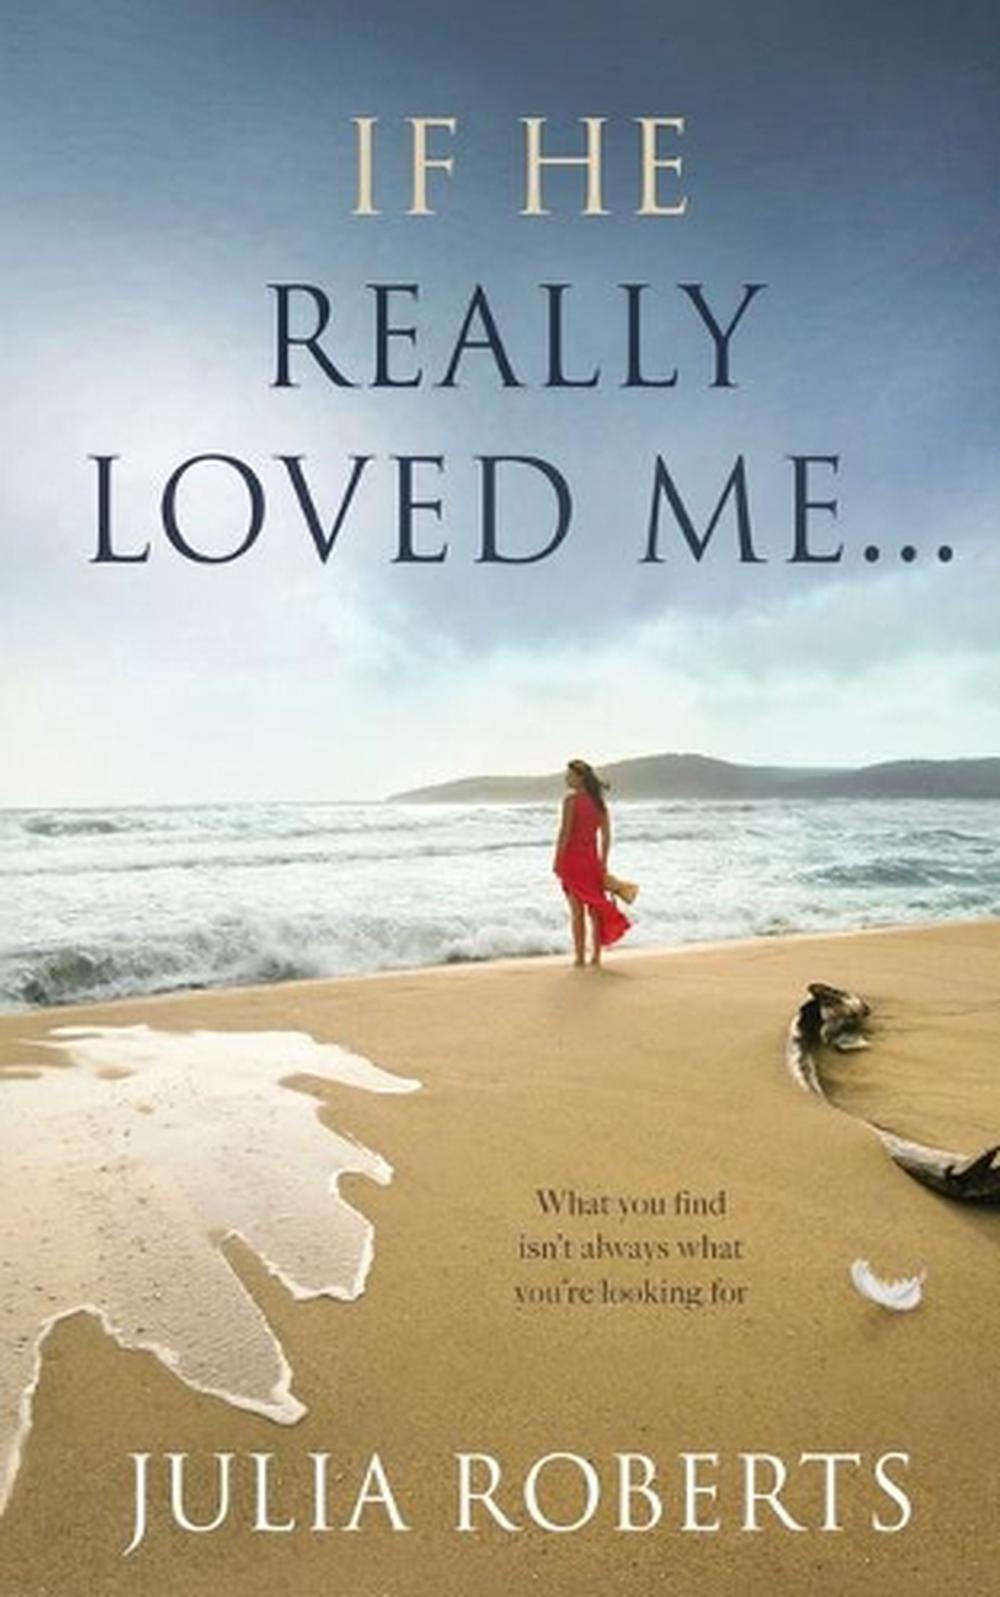 If He Really Loved Me... by Julia Roberts (English) Paperback Book Free ...